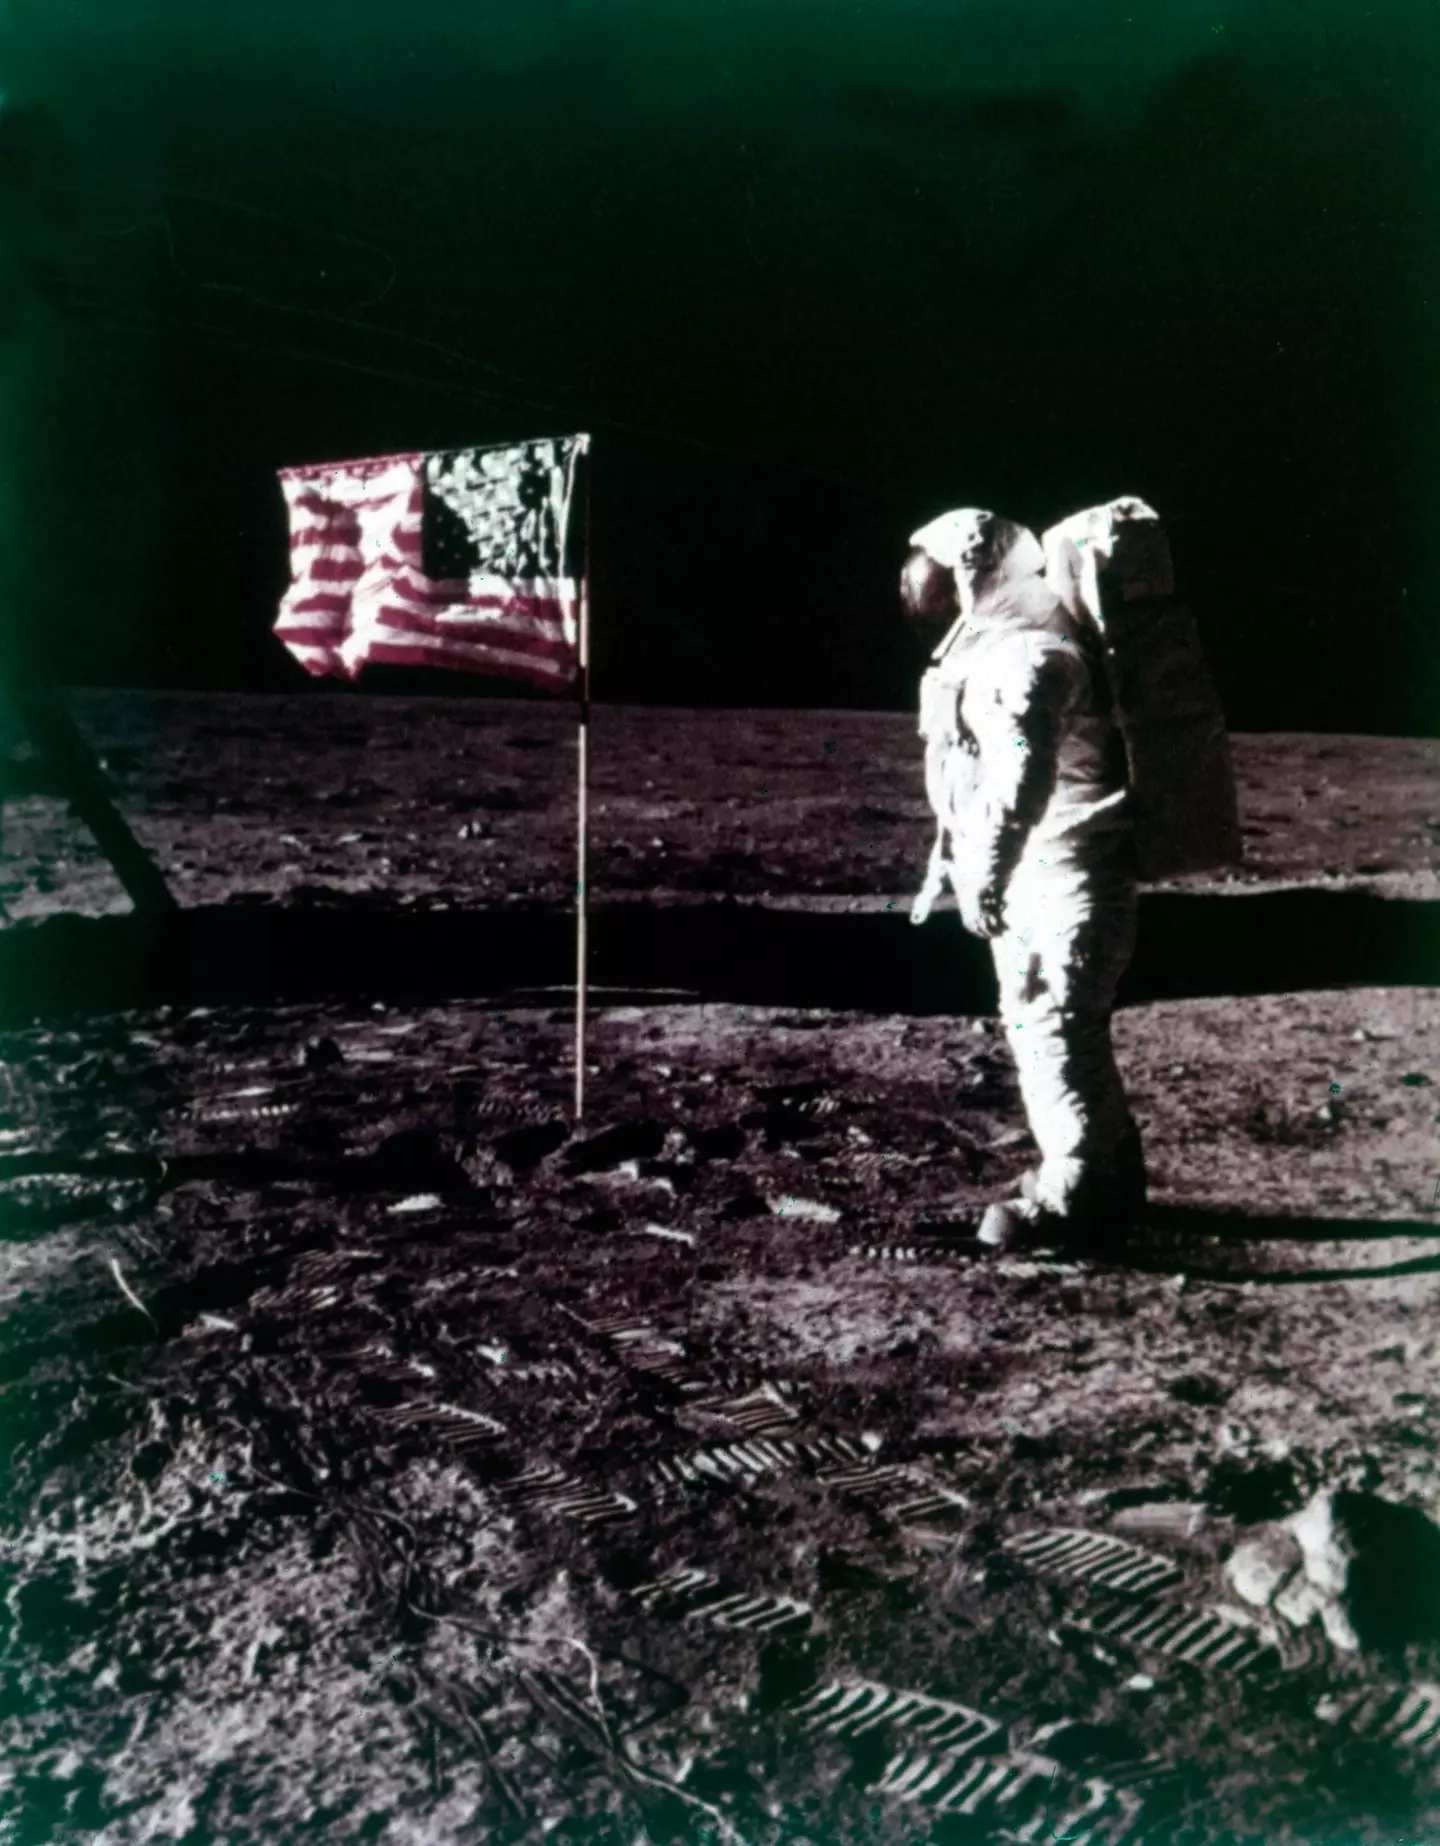 It's been more than 50 years since man landed on the Moon.